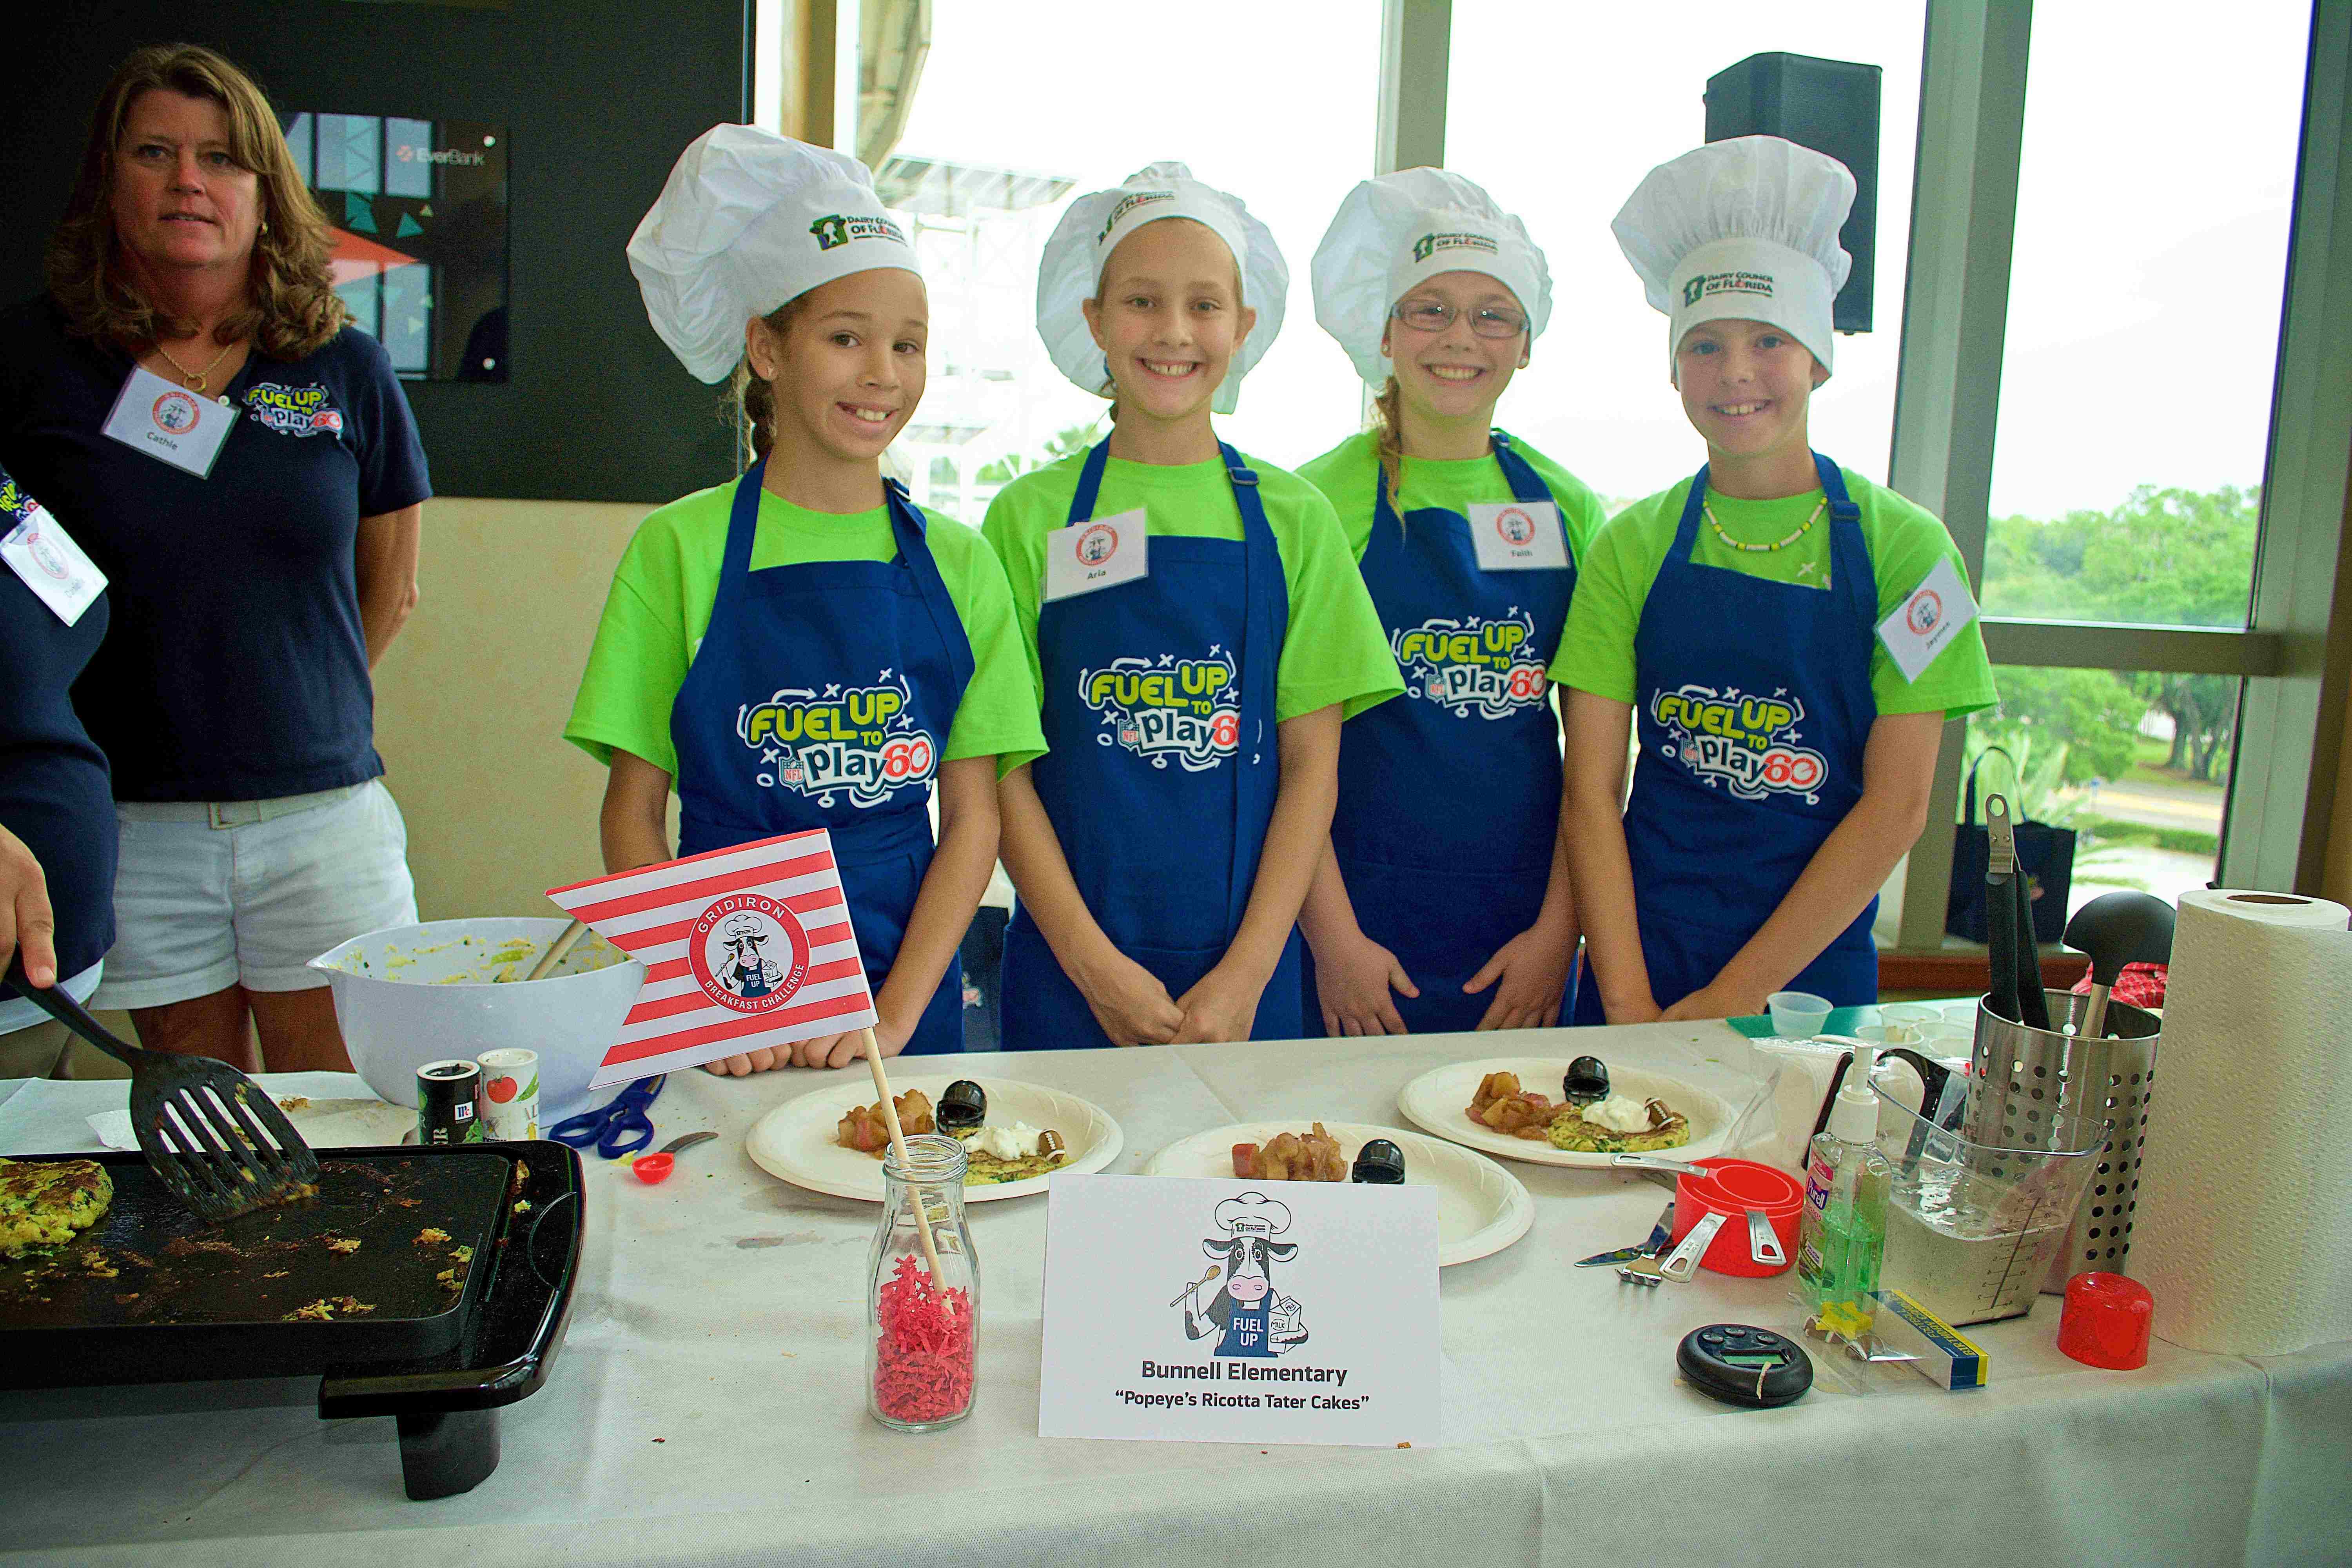 3rd annual Gridiron Kids Cooking Challenge